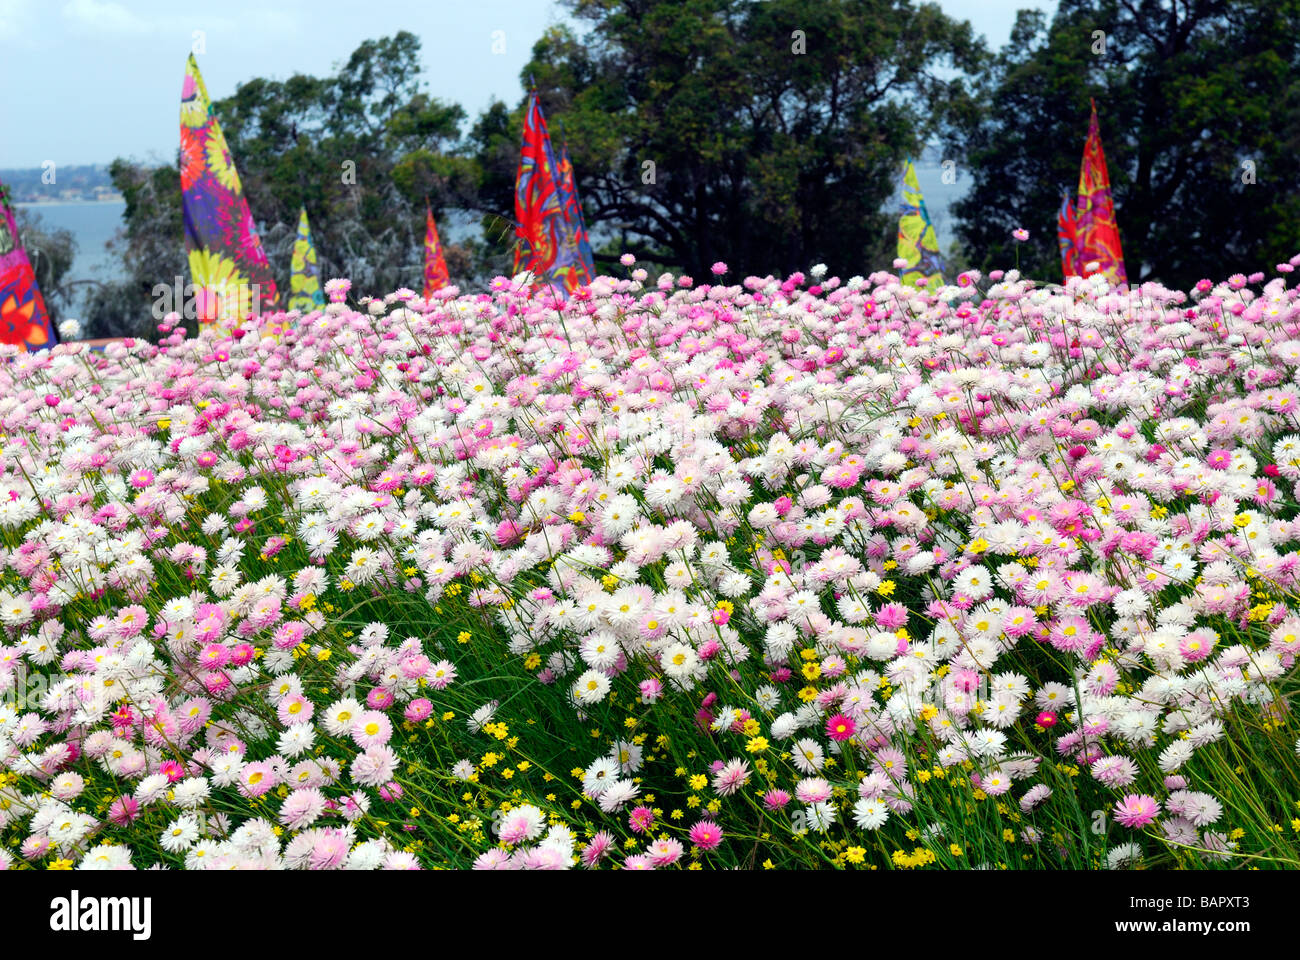 Kings Park is famous for its Spring display of Everlasting Daisies, aka Paper Daisies. Kings Park, Perth, Western Australia Stock Photo